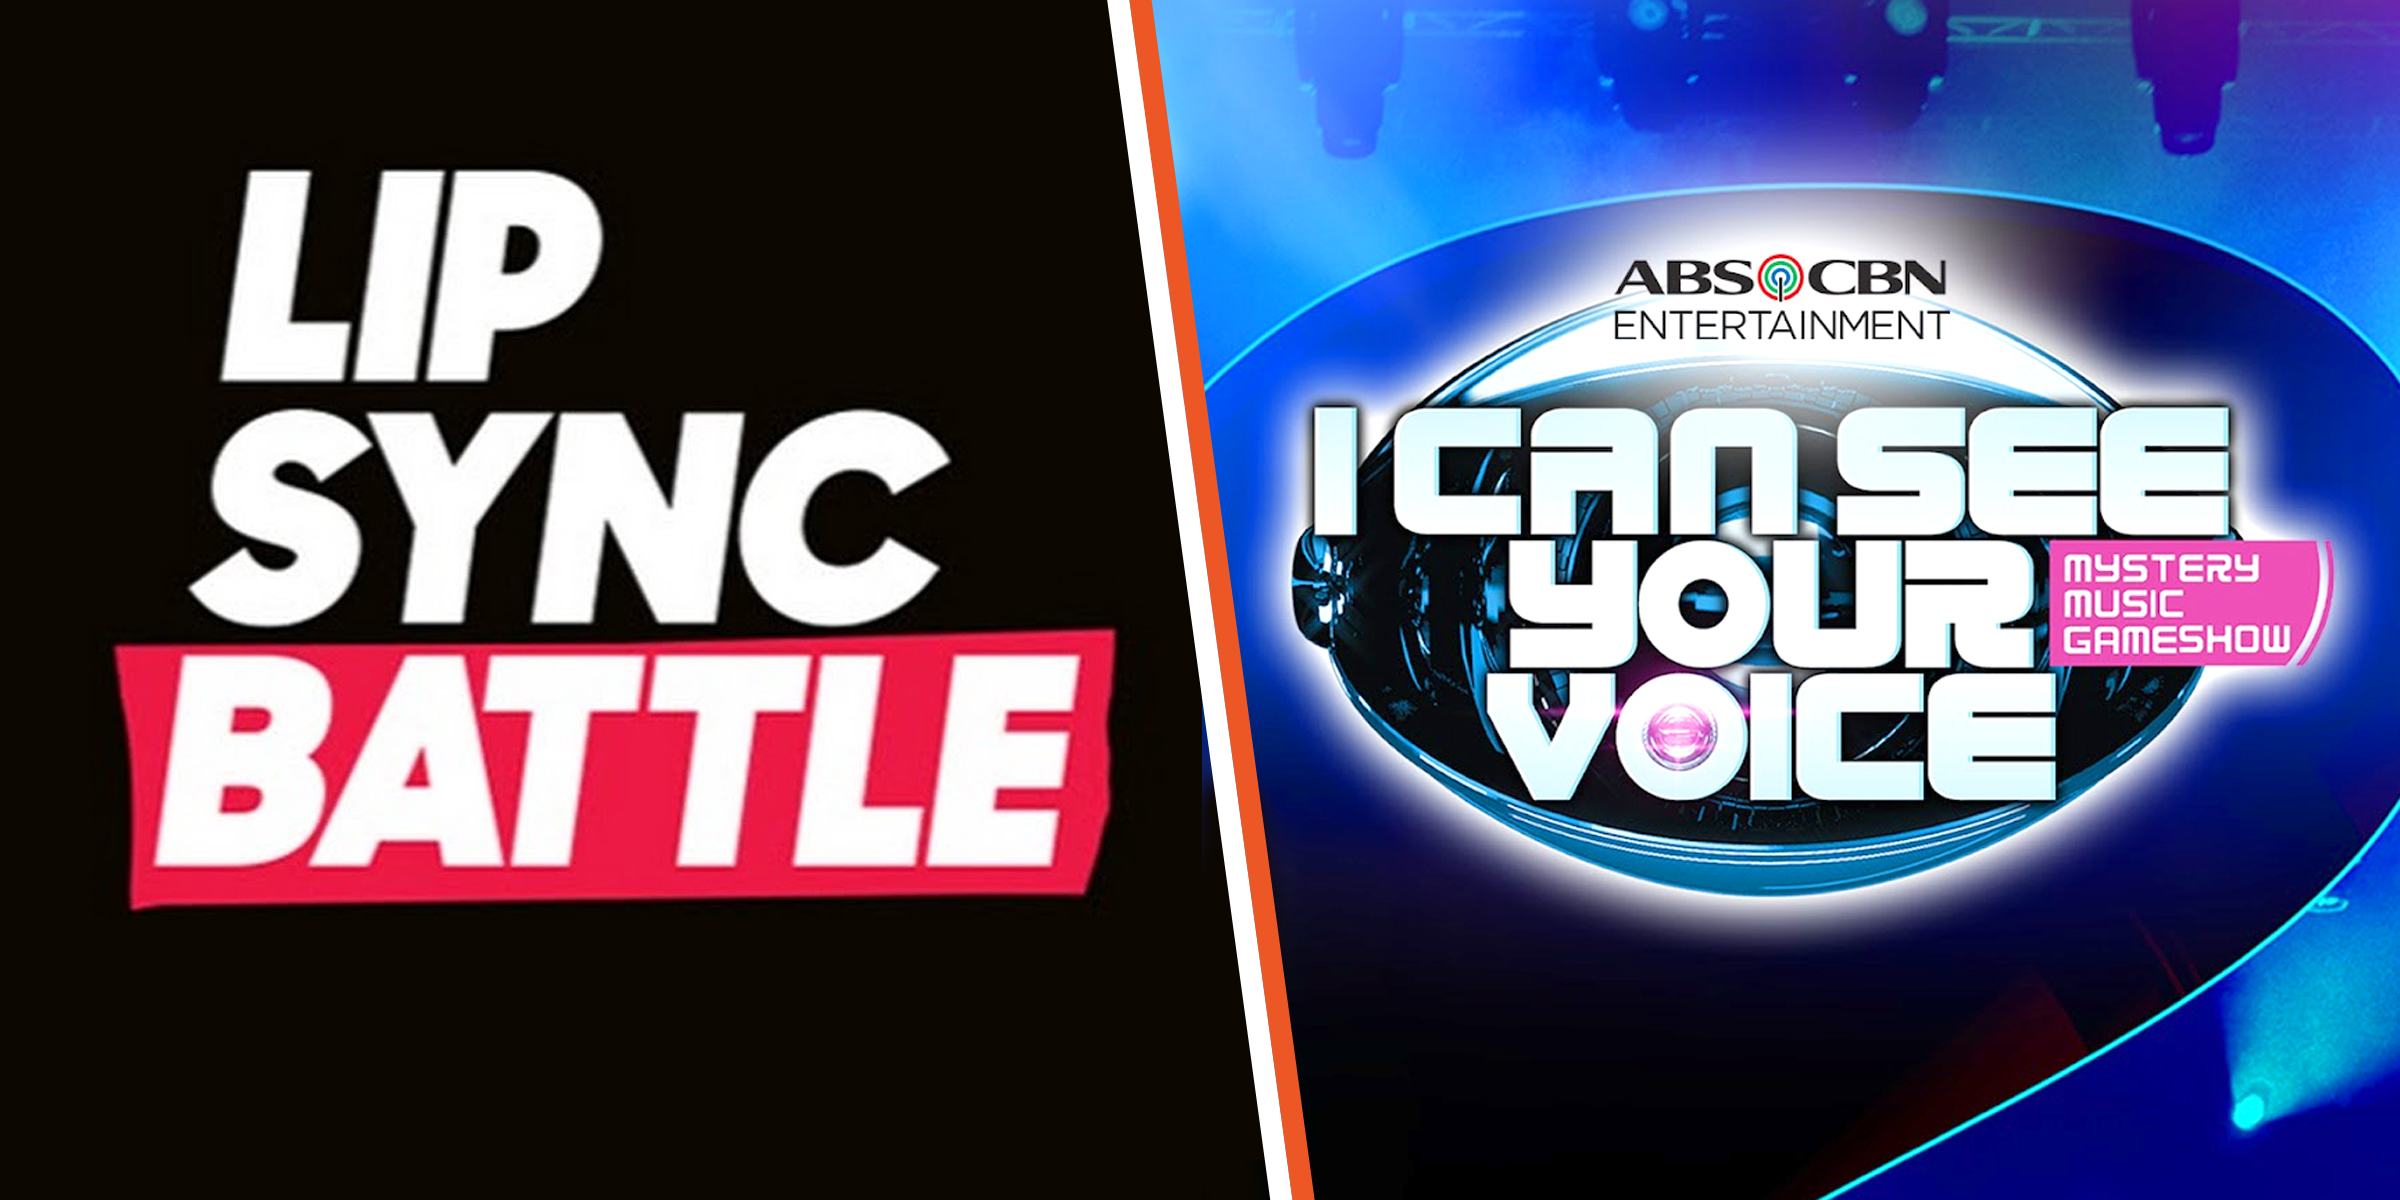 Promo Photo of "Lip Sync Battle" | Promo Photo of "I Can See Your Voice" | Source: Youtube/LipSyncBattle | Youtube/I Can See Your Voice PH